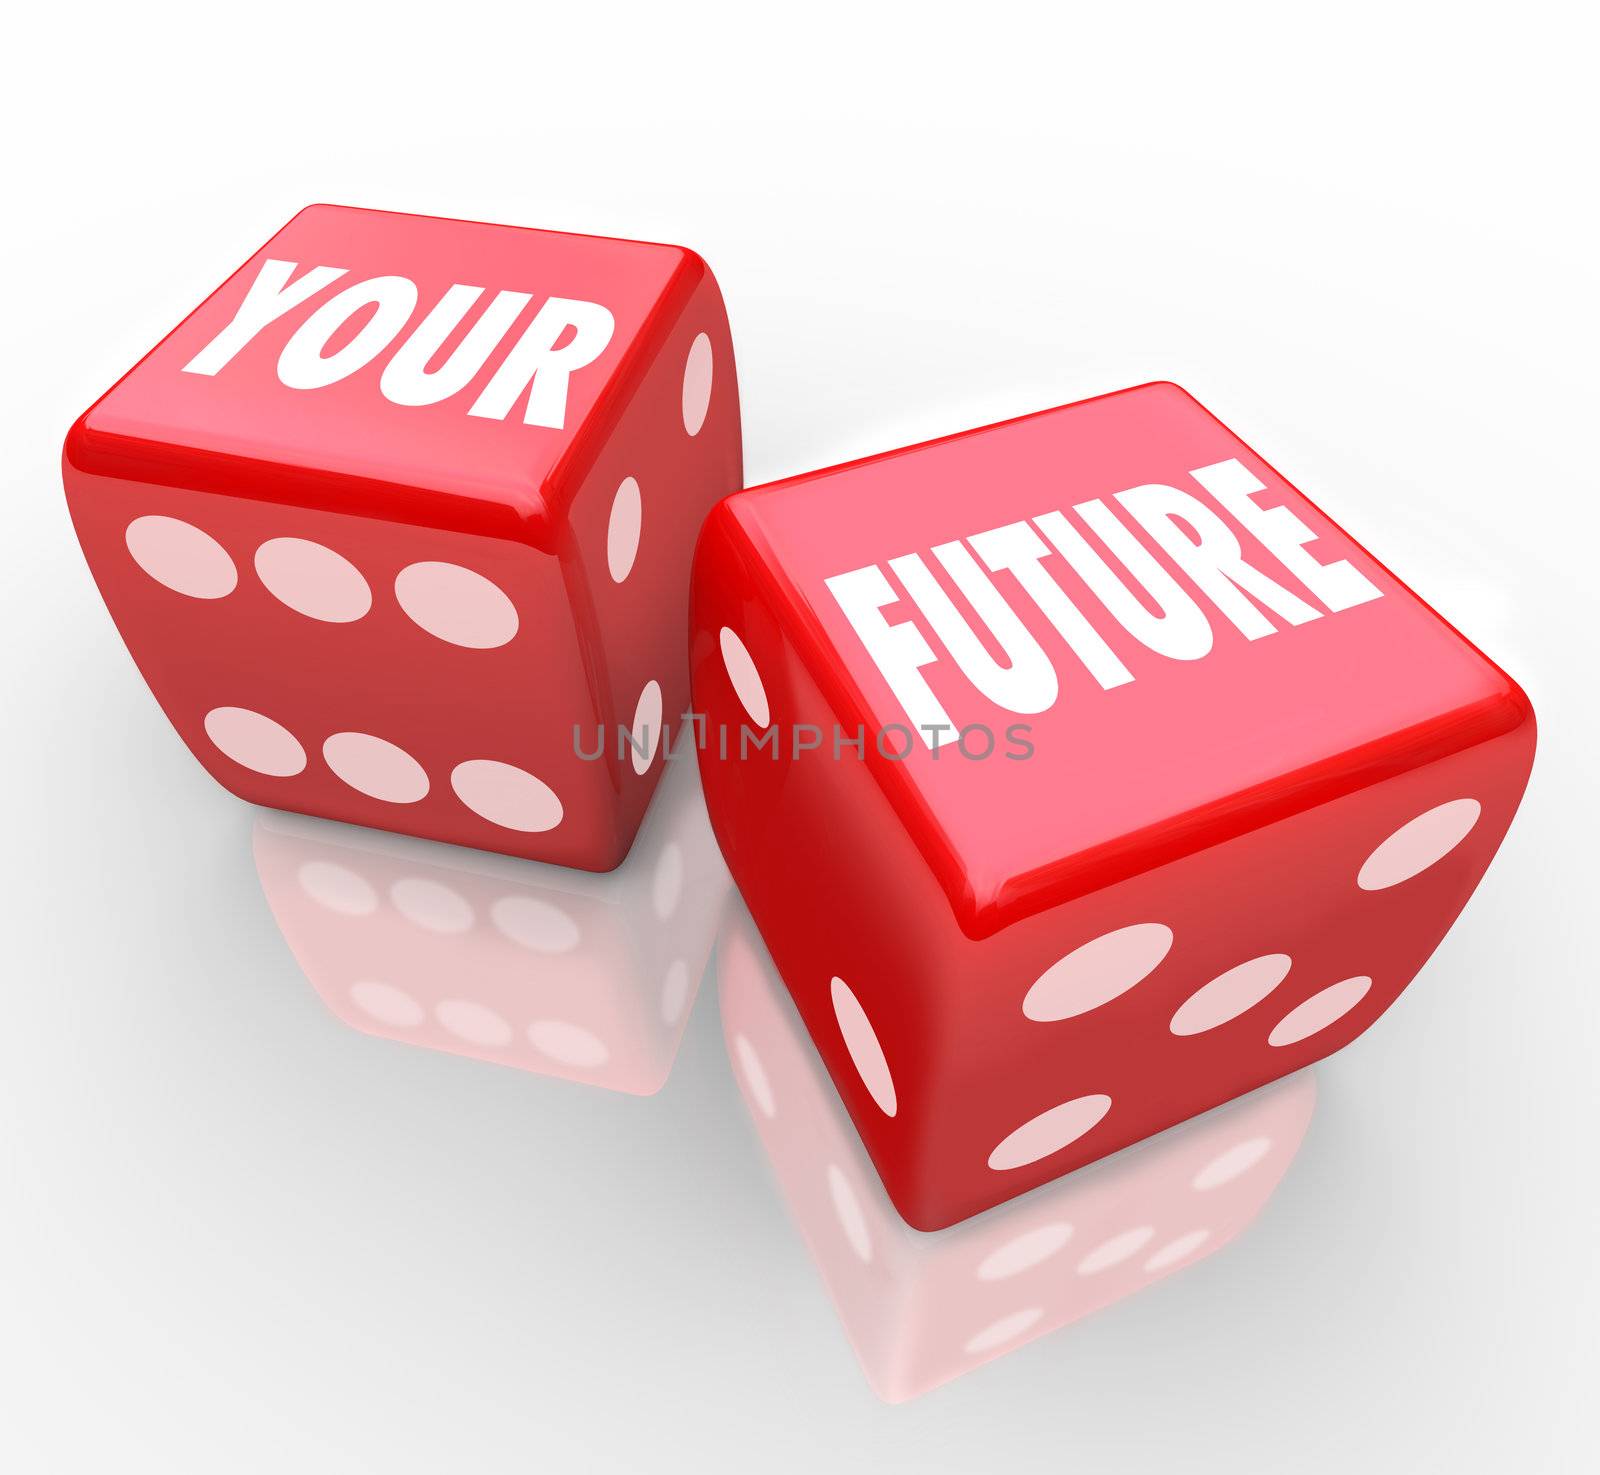 Two red dice with the words Your Future on their faces, symbolizing the risks in gambling